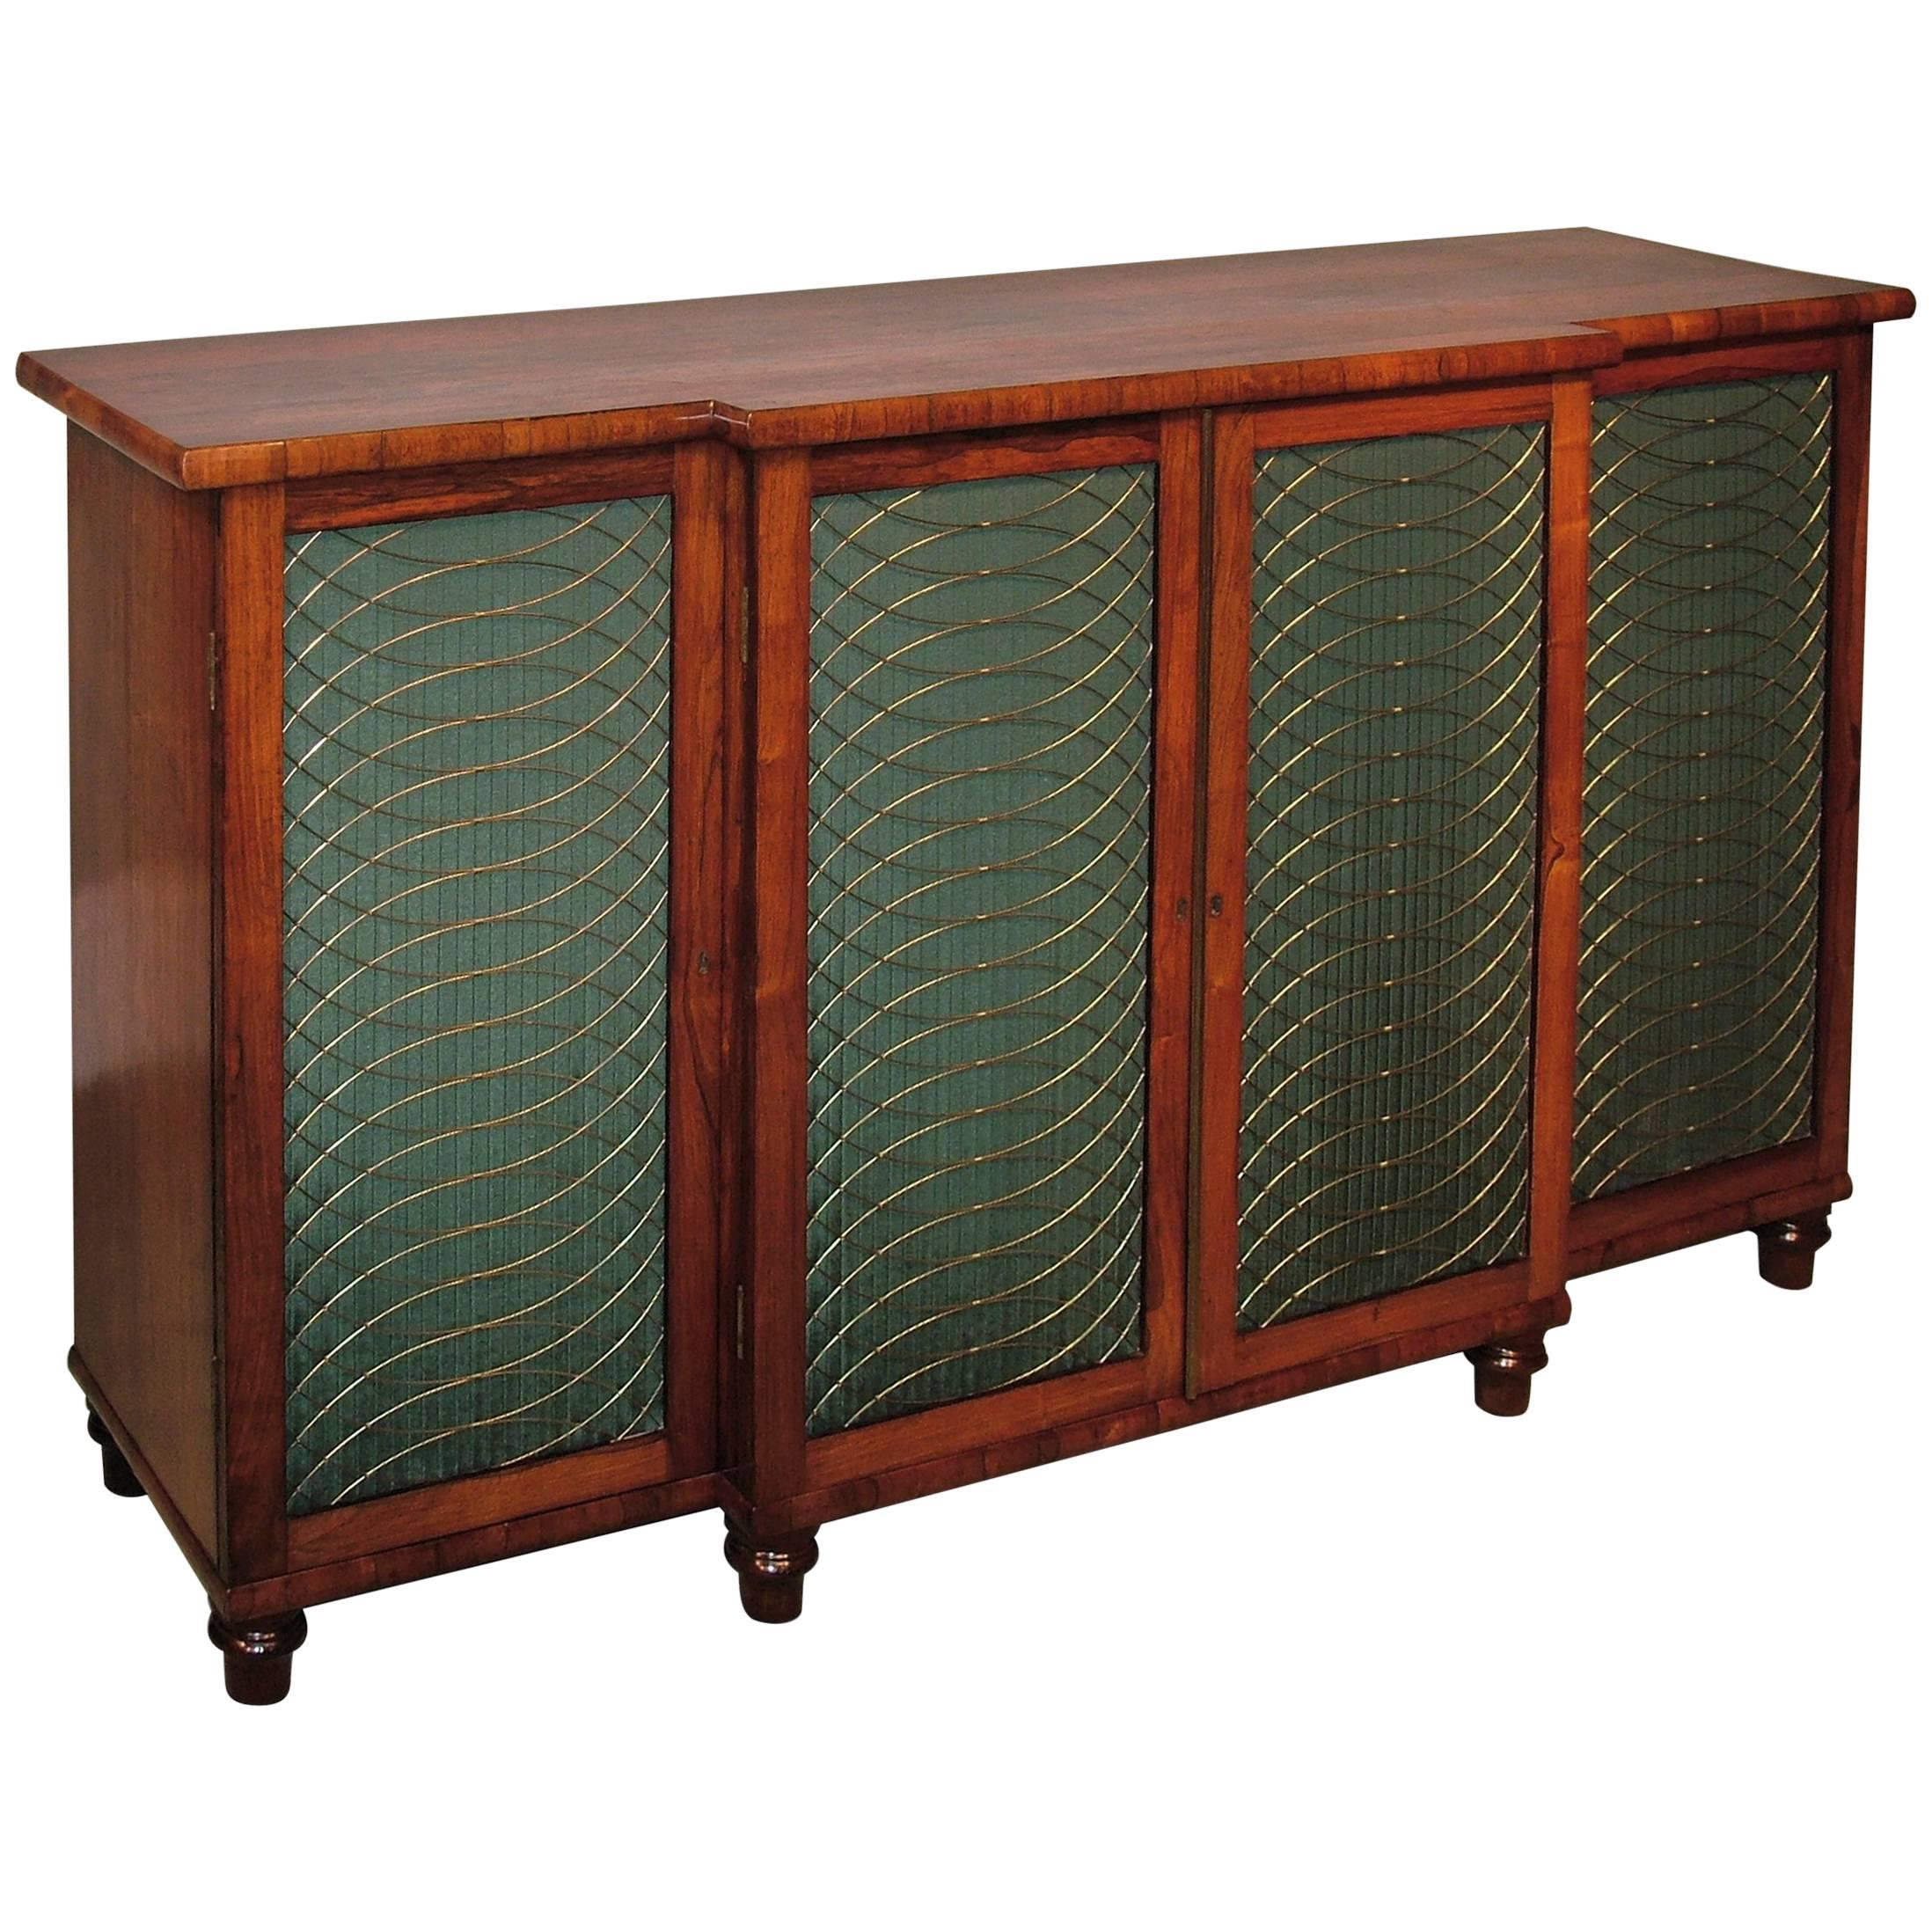 Regency period rosewood chiffonier with green pleating